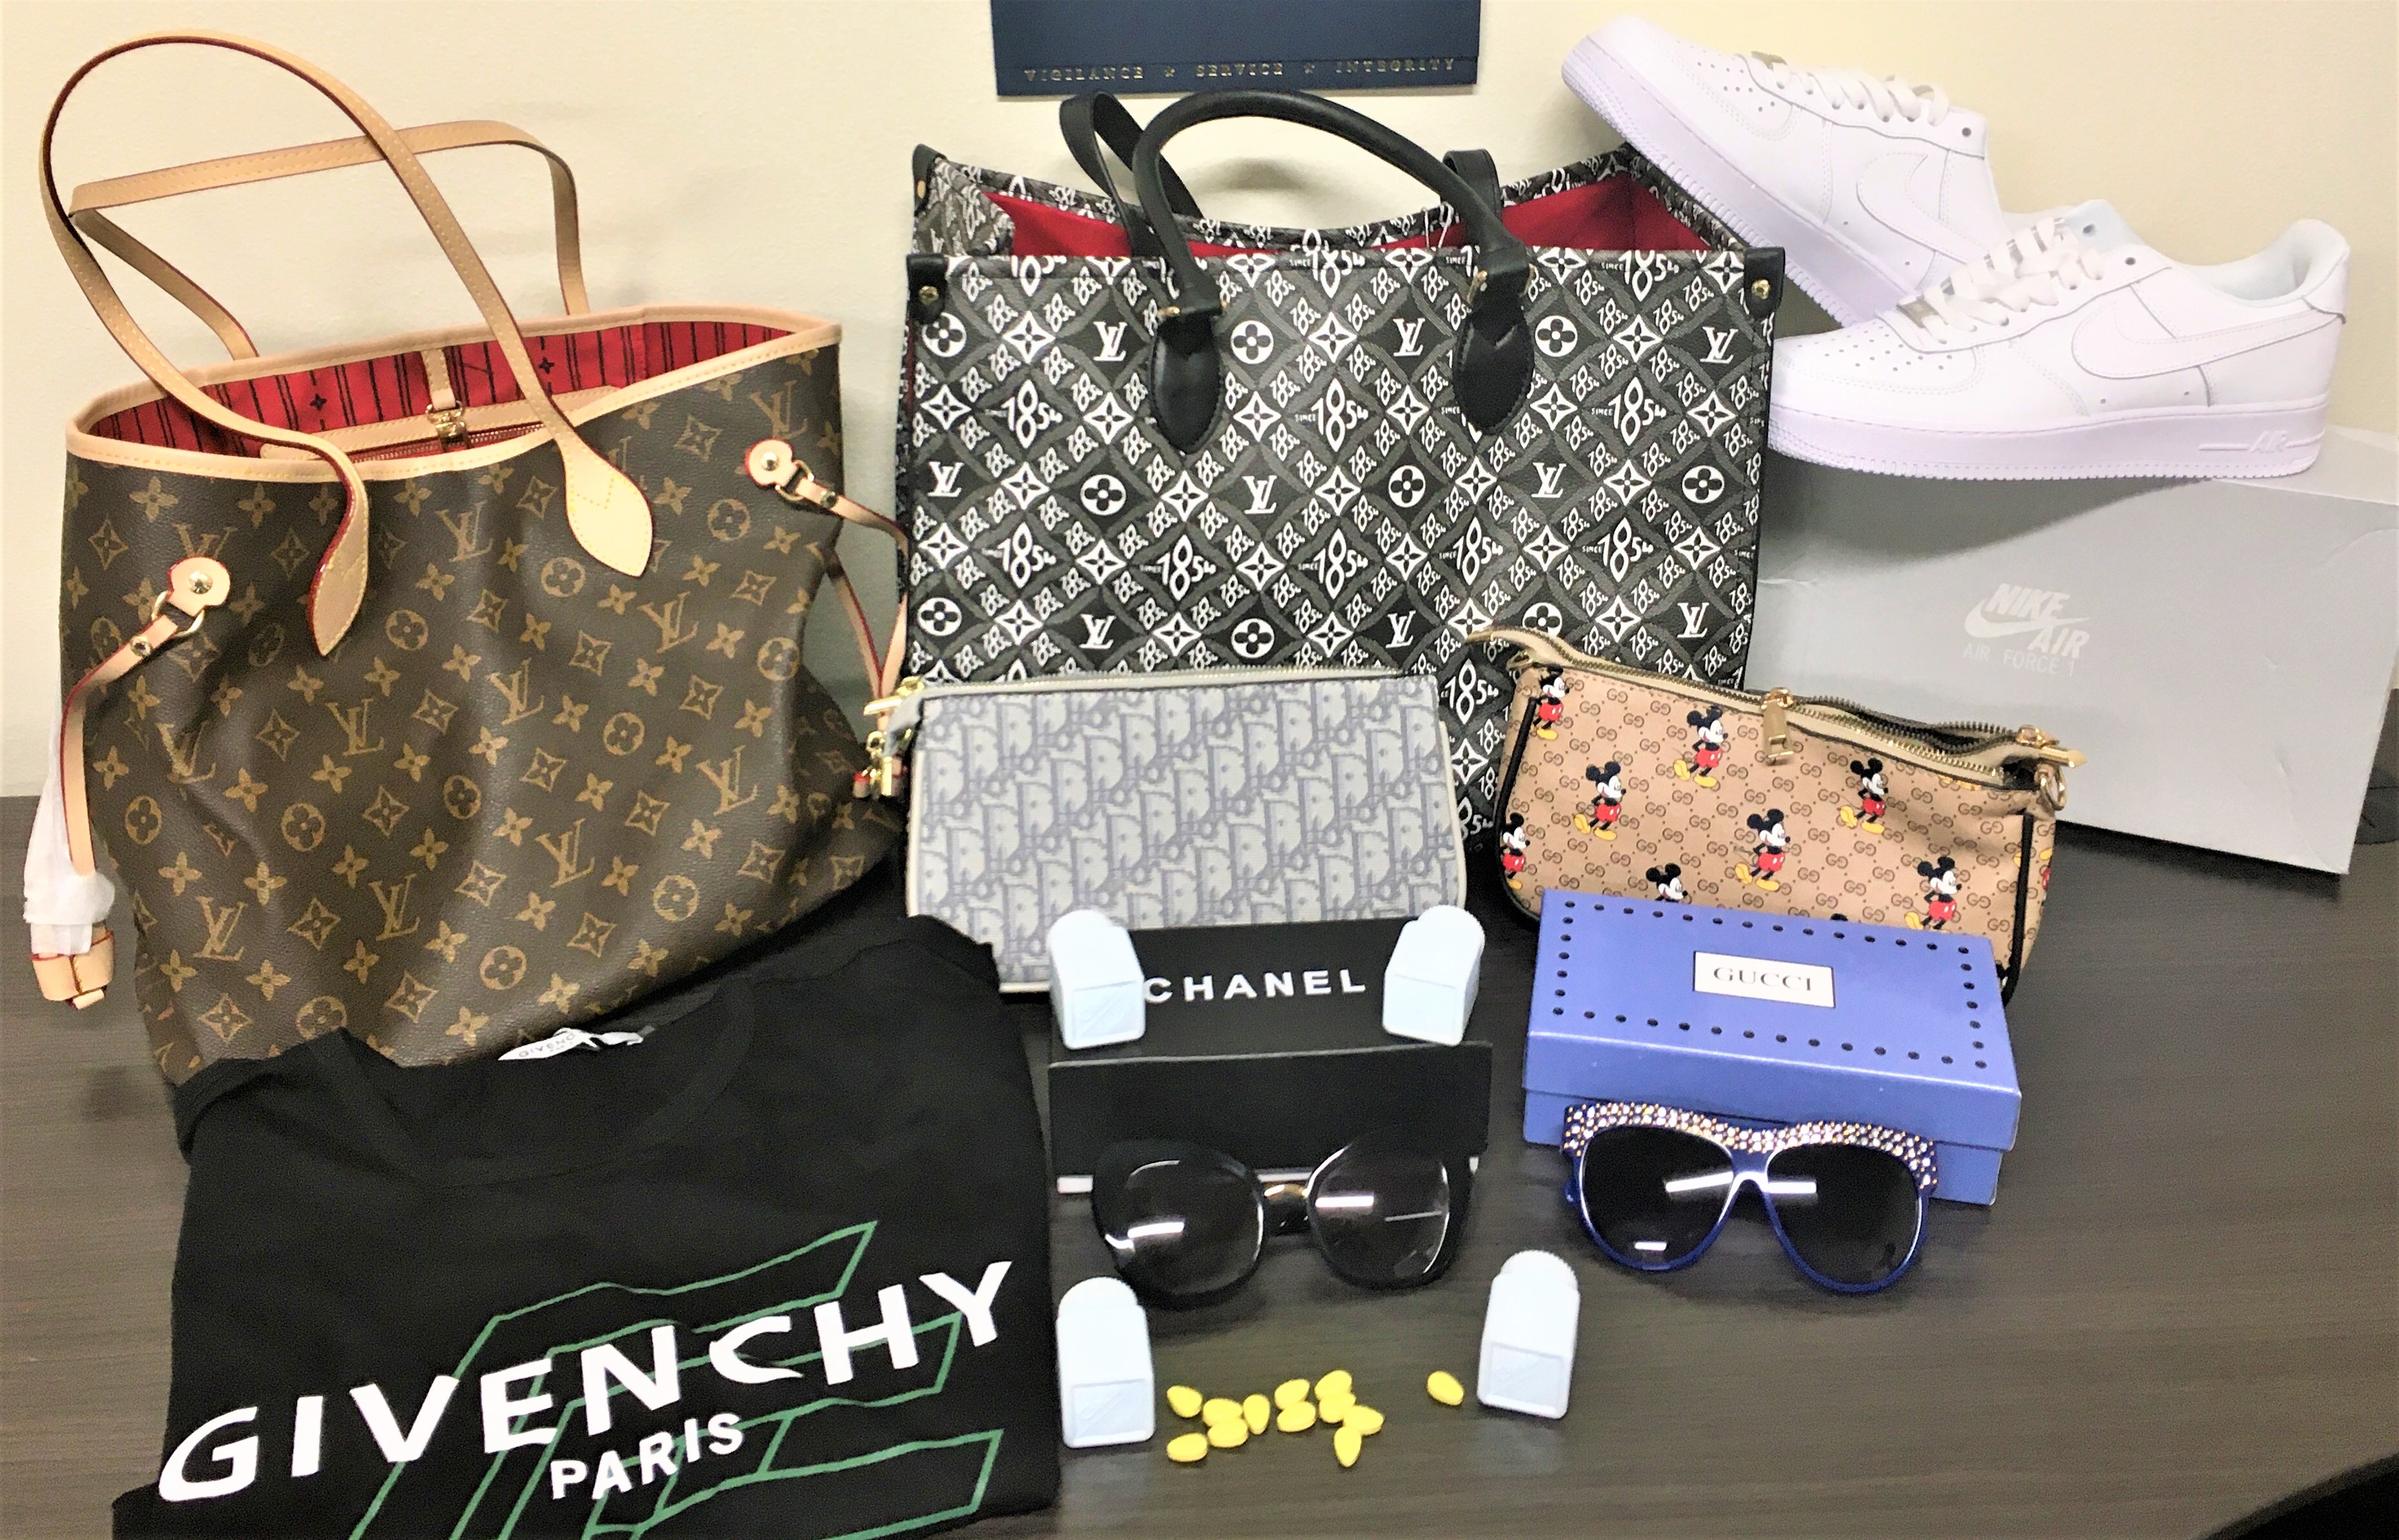 From Gucci to Louis Vuitton, New York's fake luxury goods